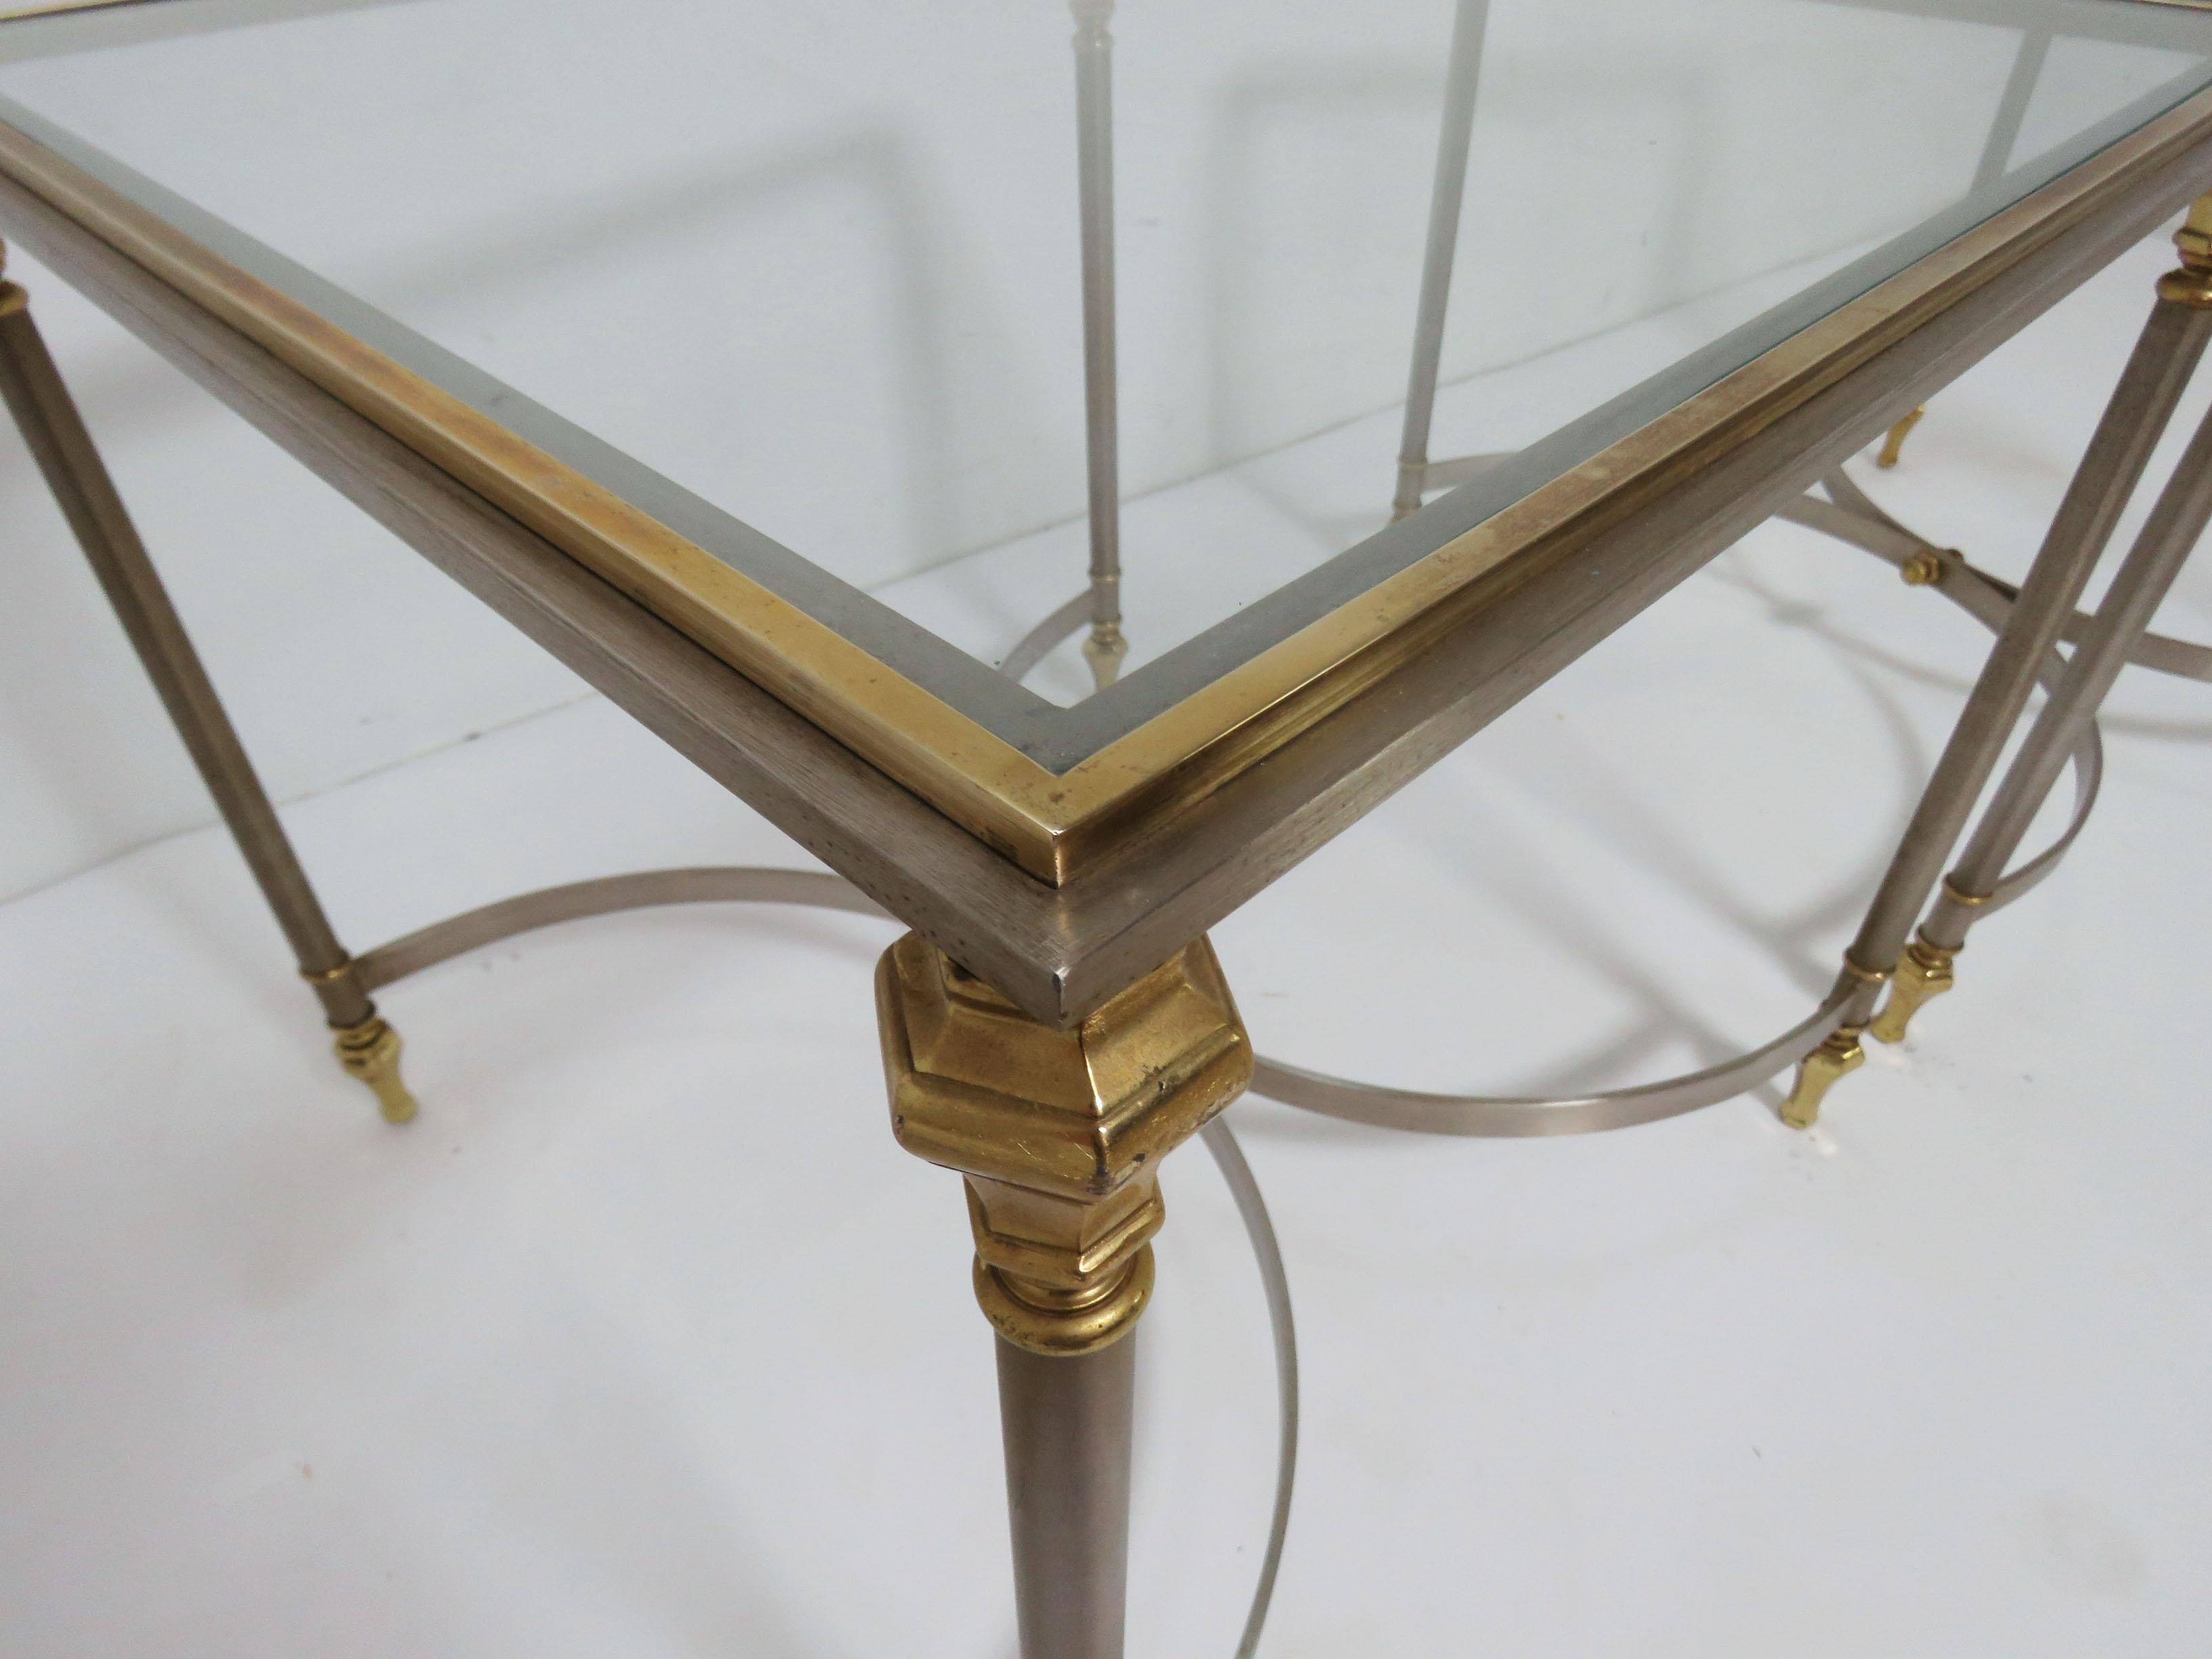 Pair of Maison Jansen Style Mixed Metal Side Tables, Made in Italy, circa 1960s (Gebürstet)